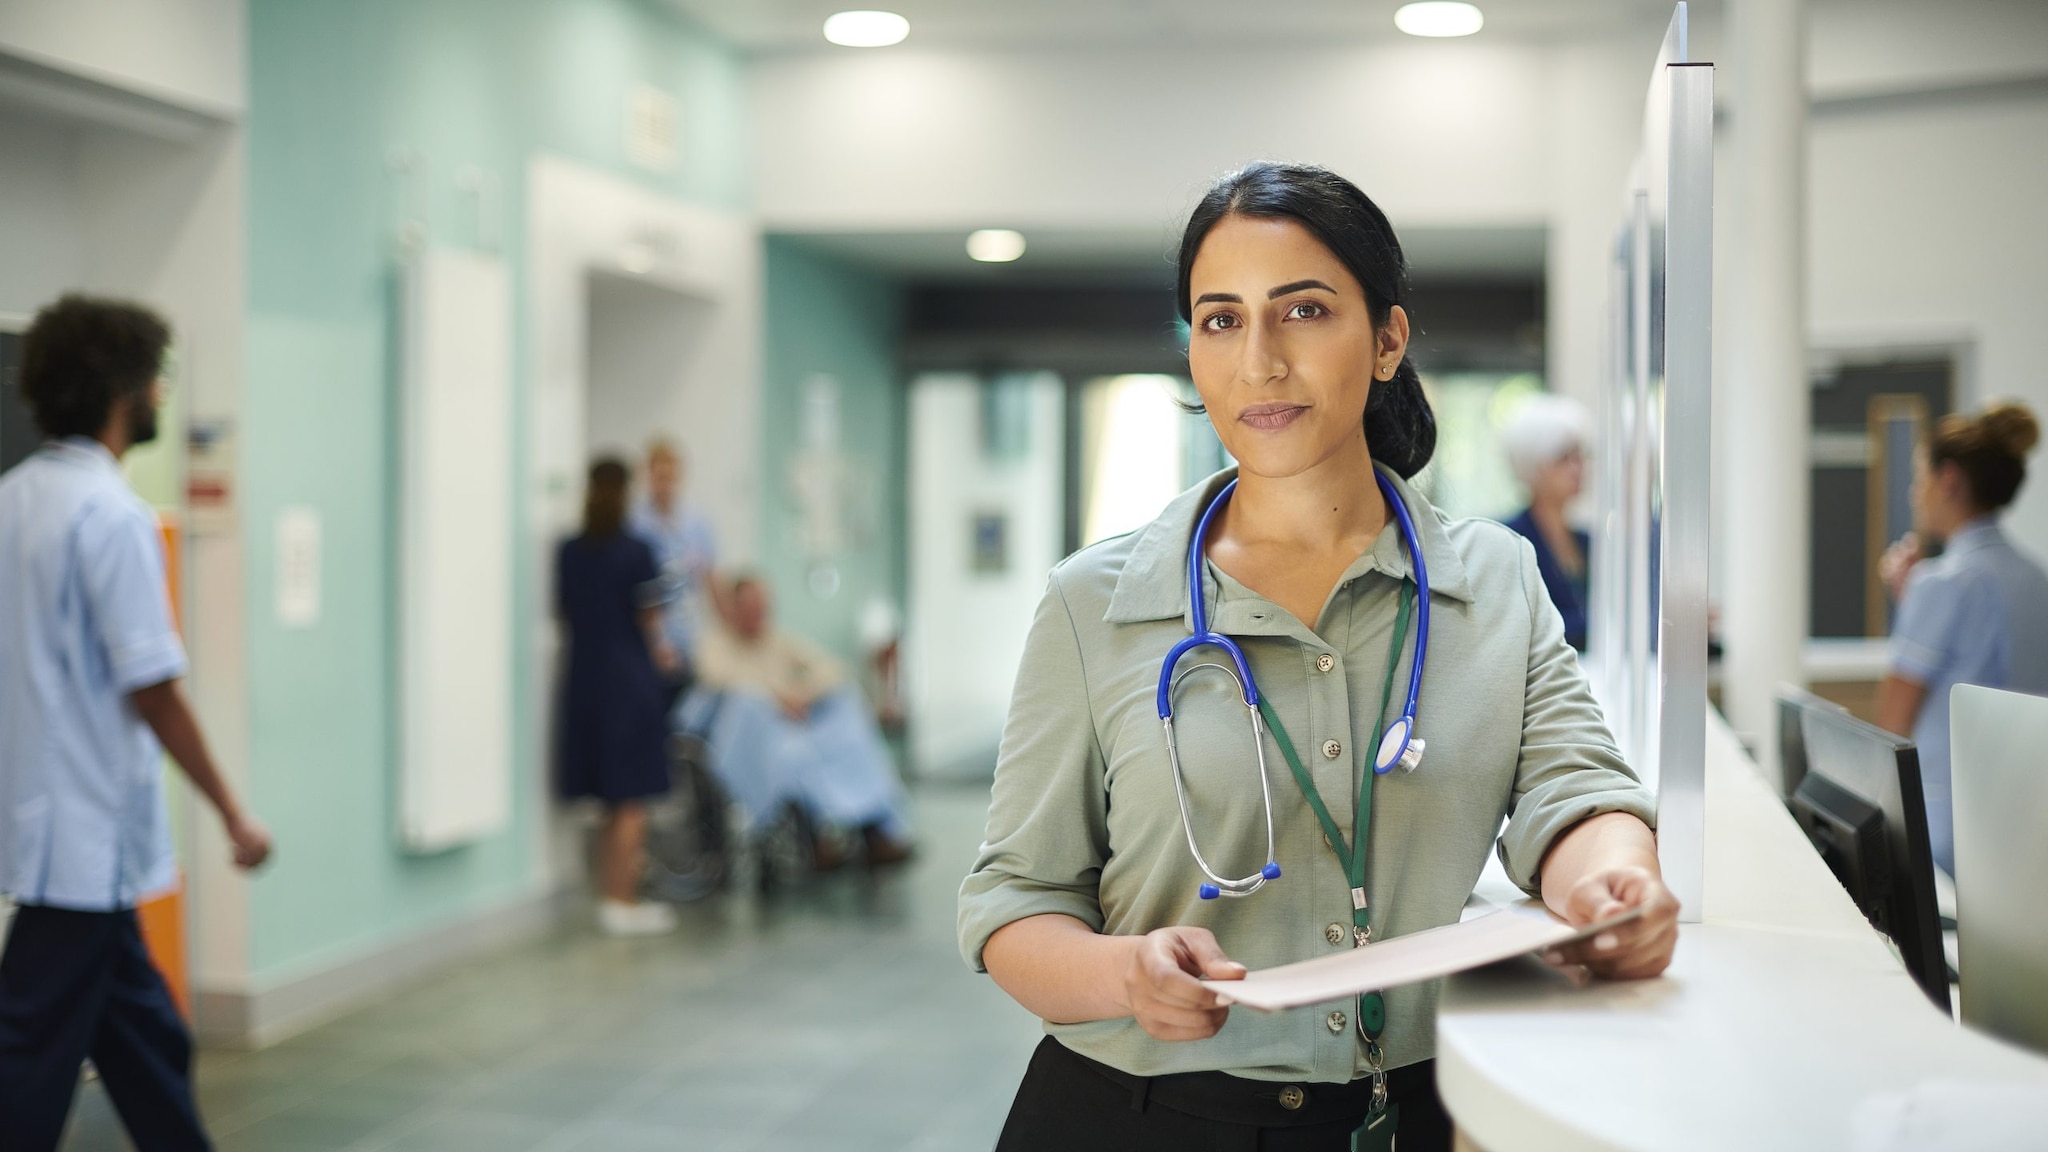 Female doctor stands in medical facility wearing a green shirt and stethoscope